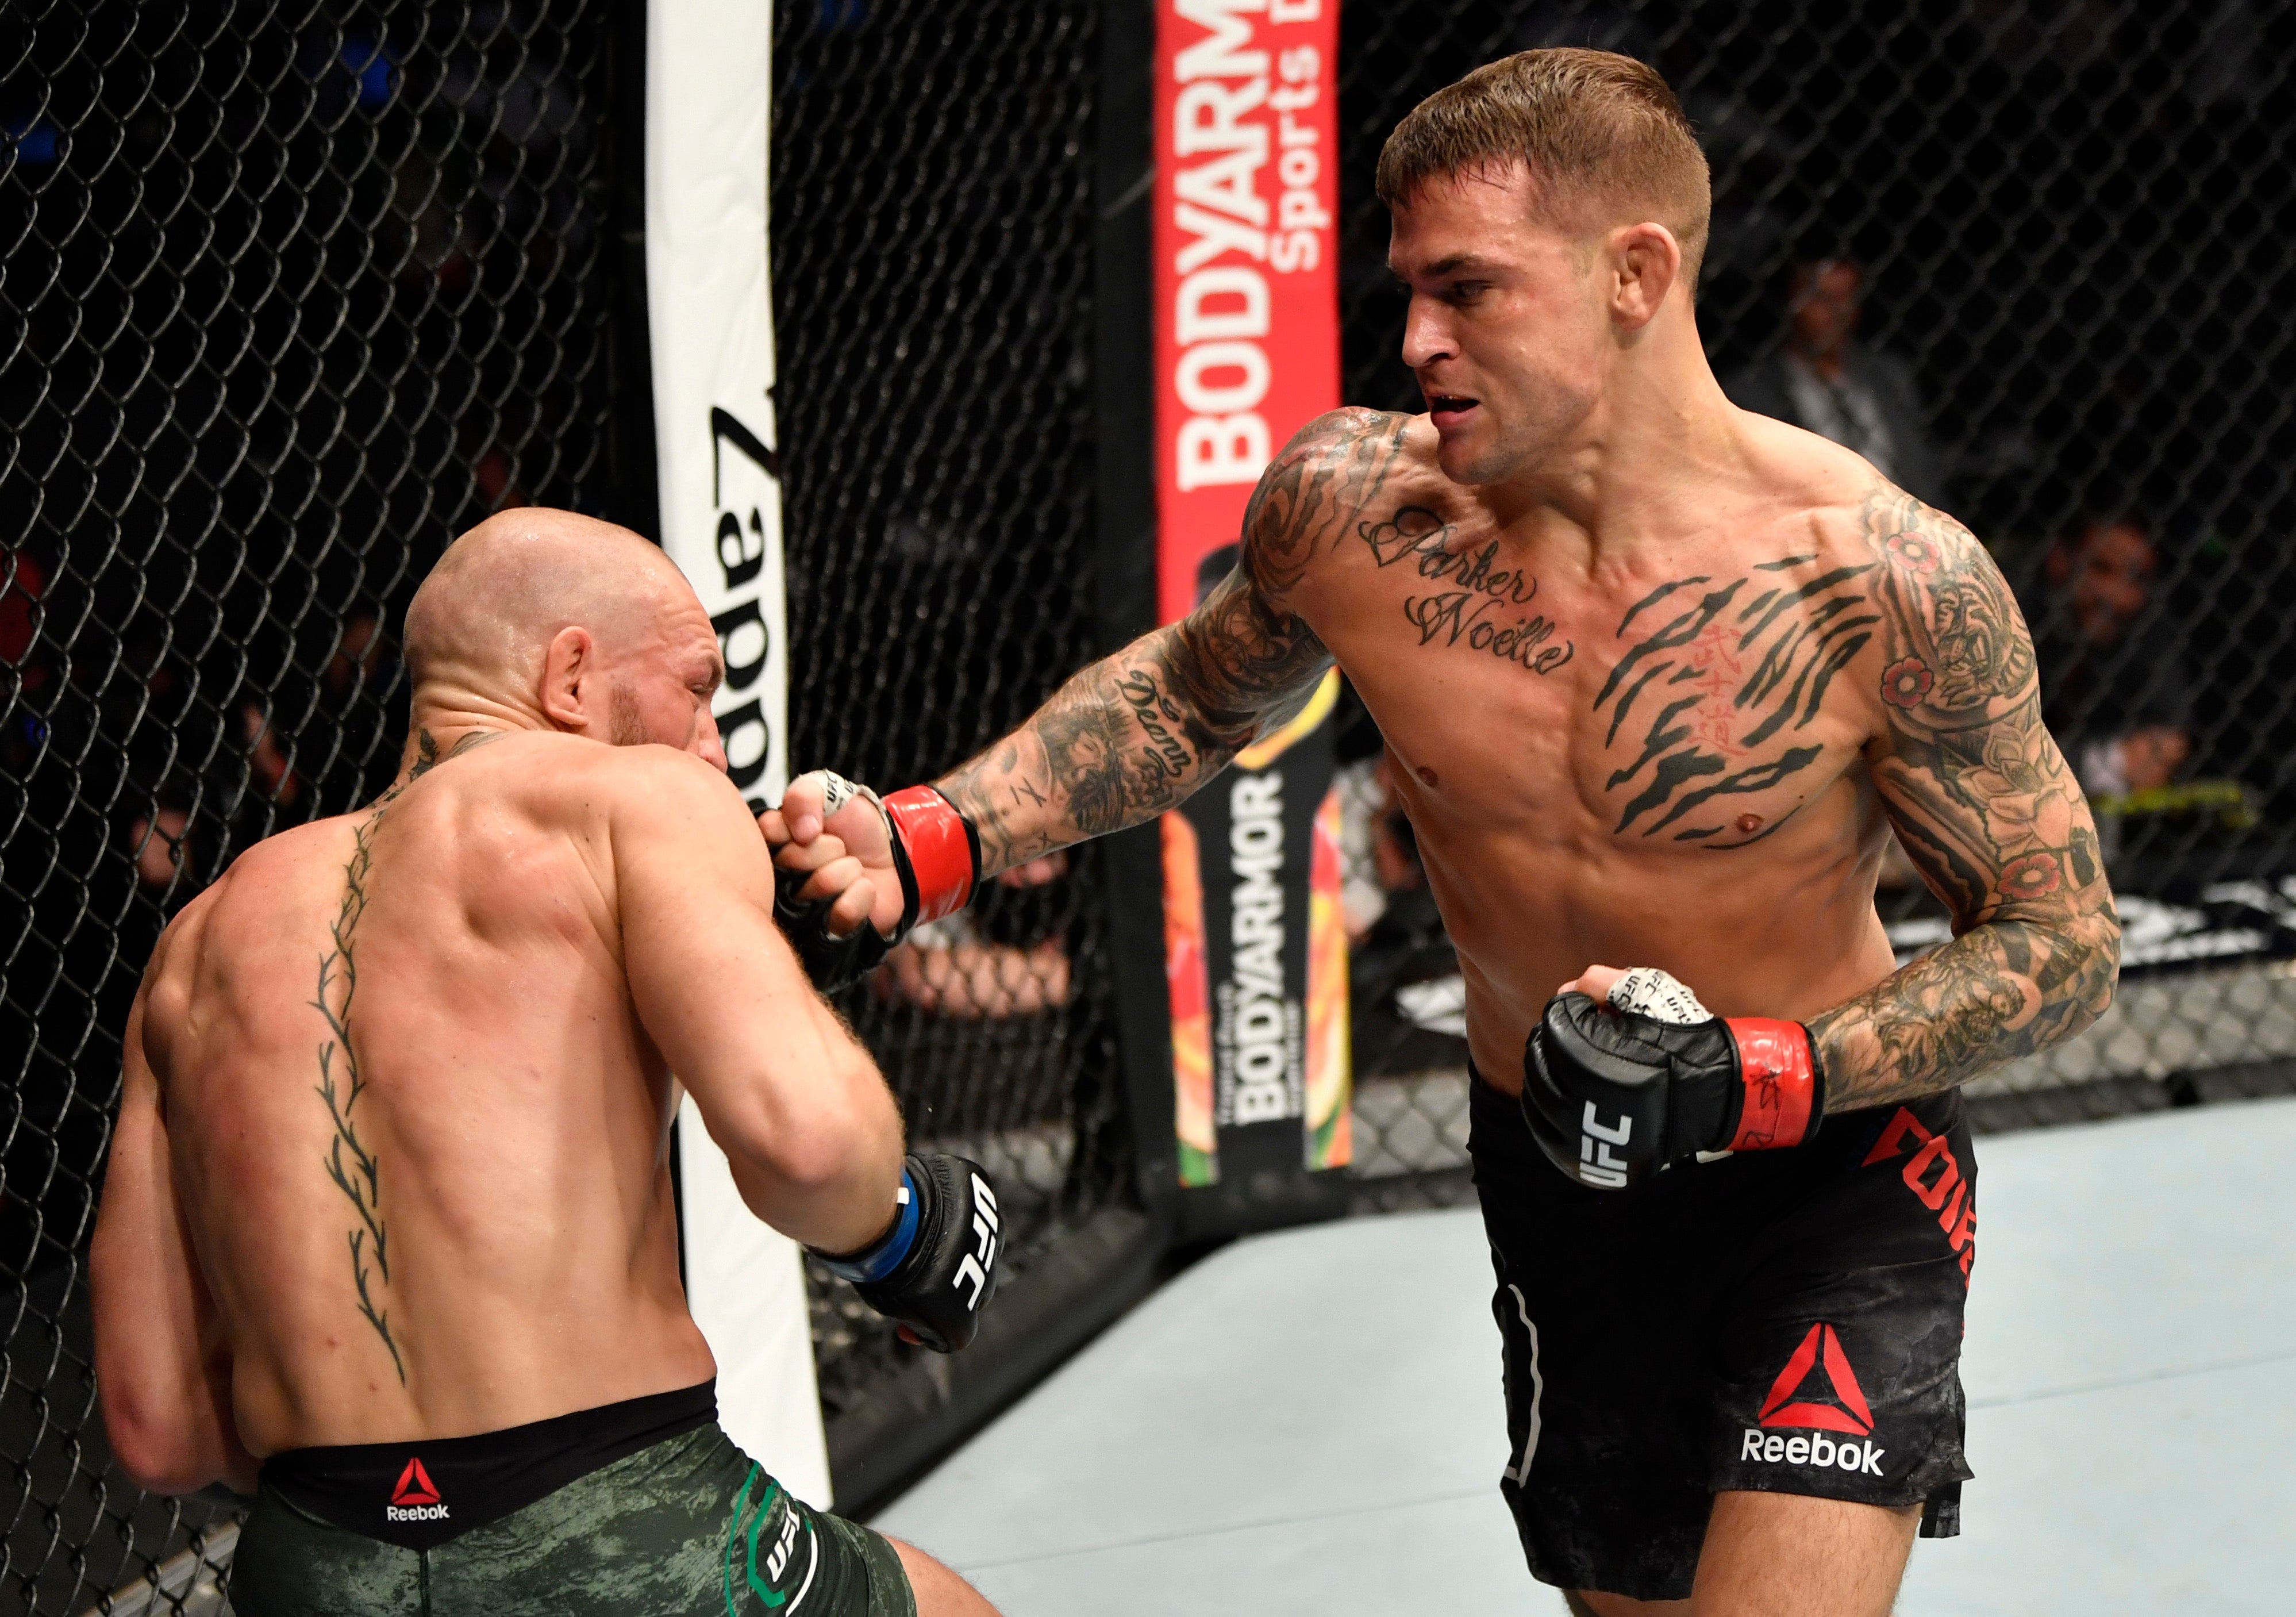 Dustin Poirier knocks out Conor McGregor in the pair’s UFC rematch in January